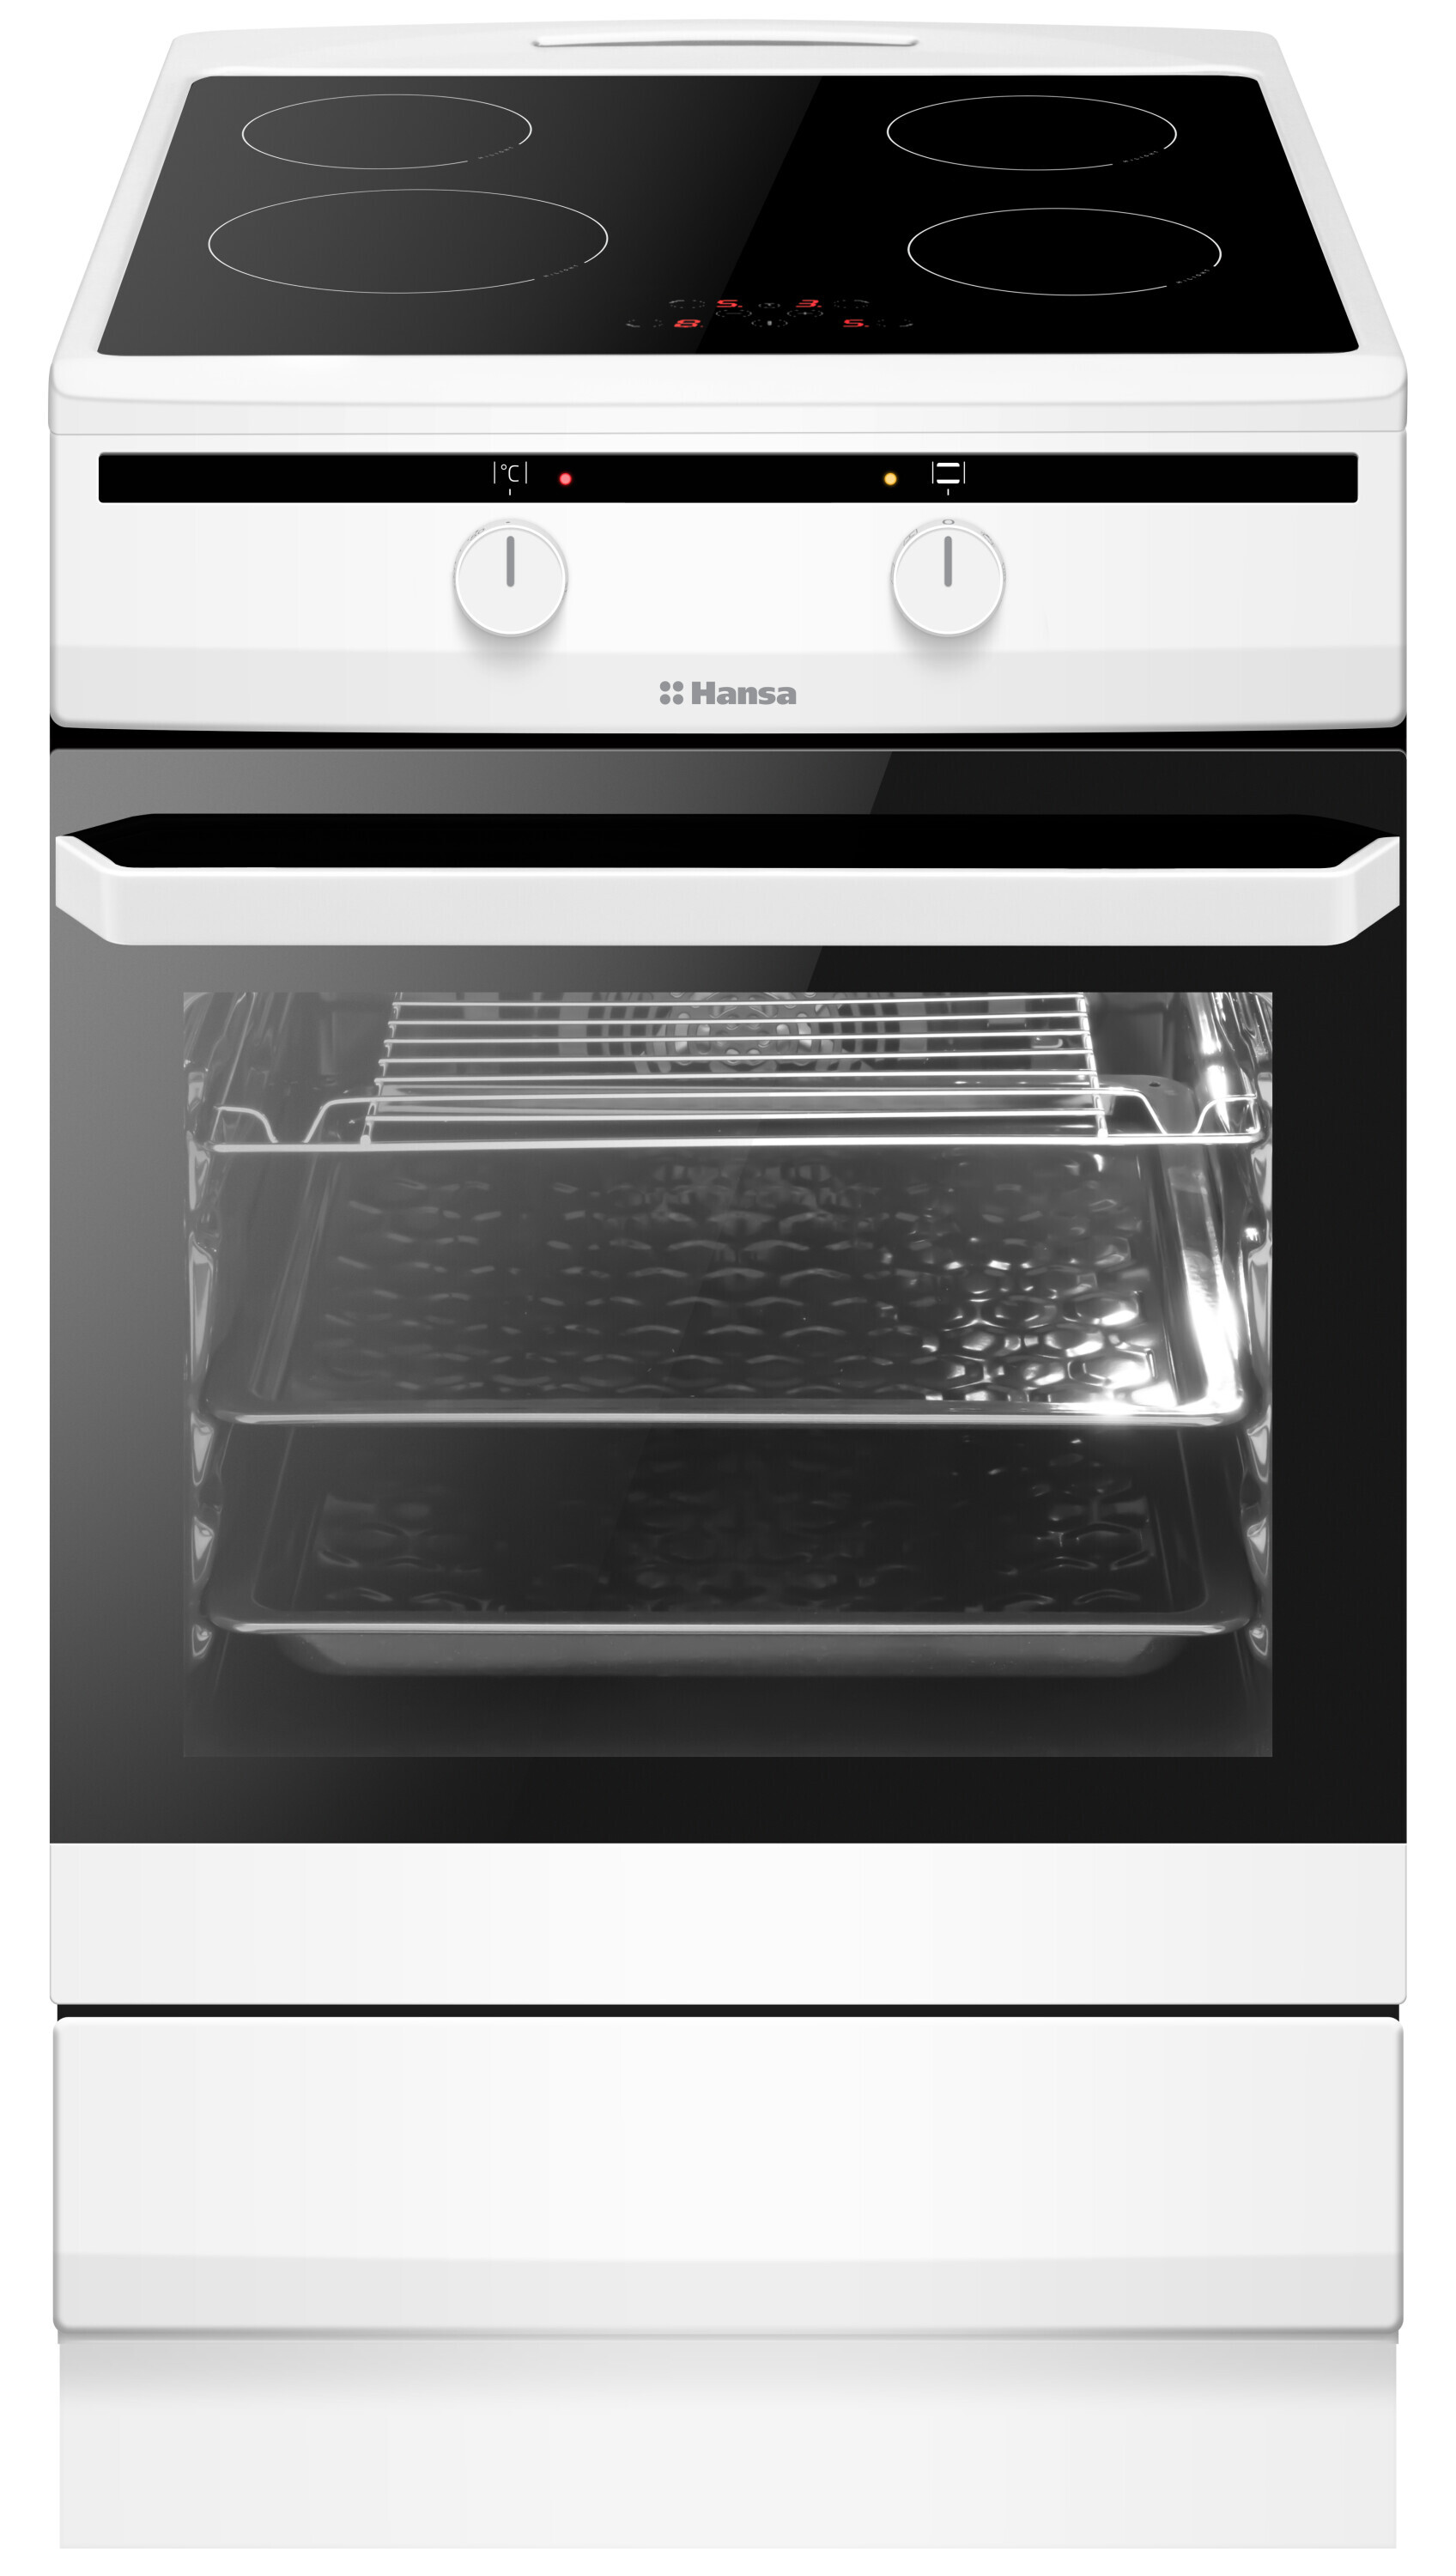 Freestanding cooker with induction hob